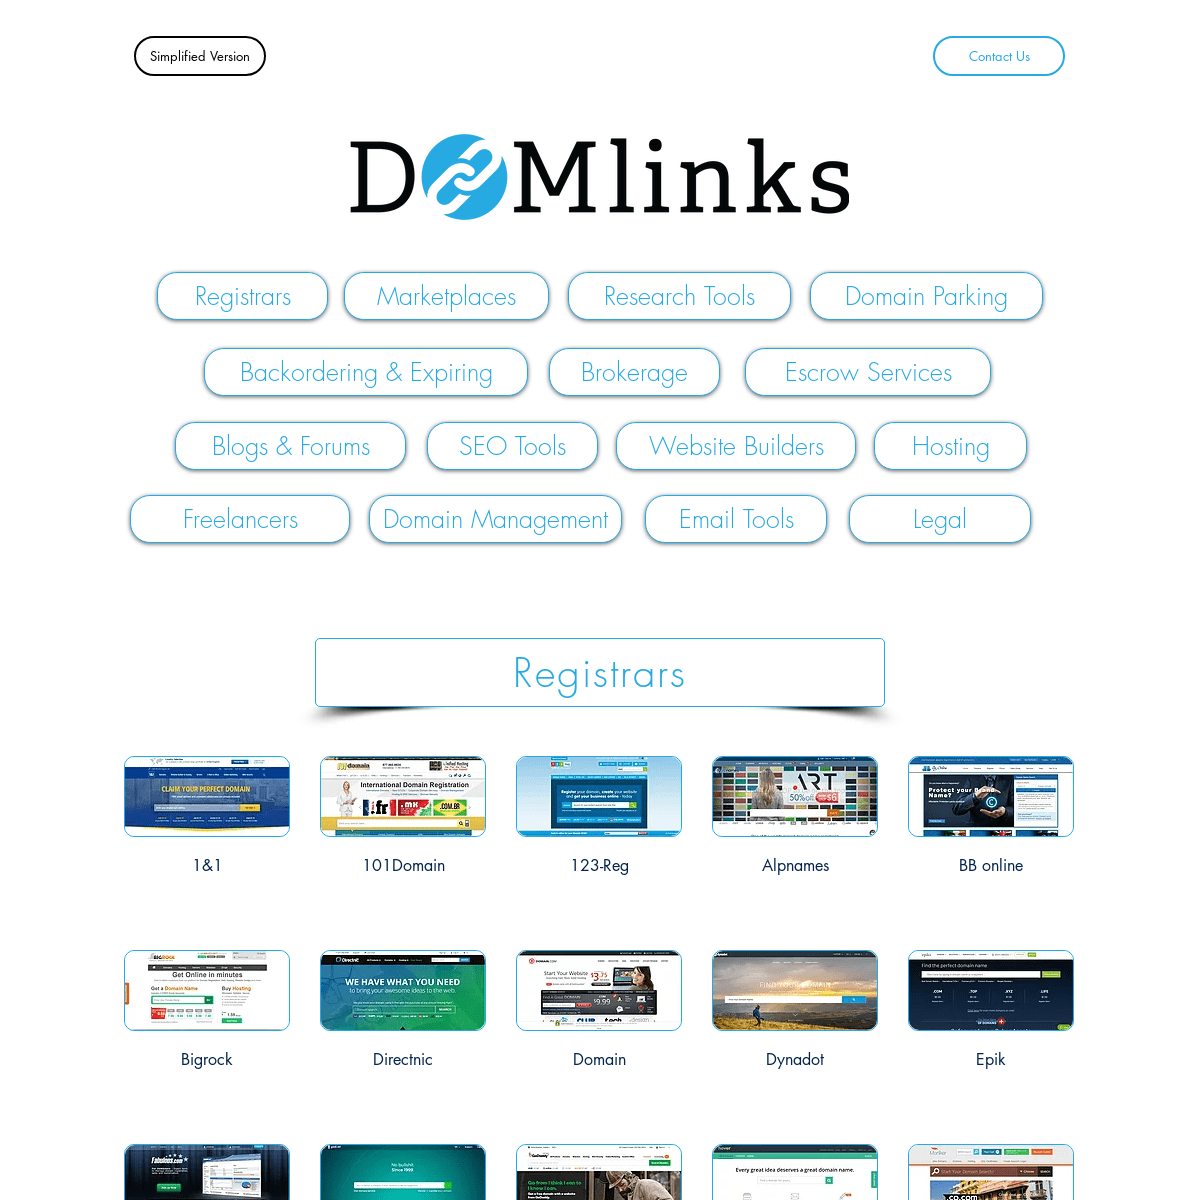 Get linked to the domaining world with DOMlinks!